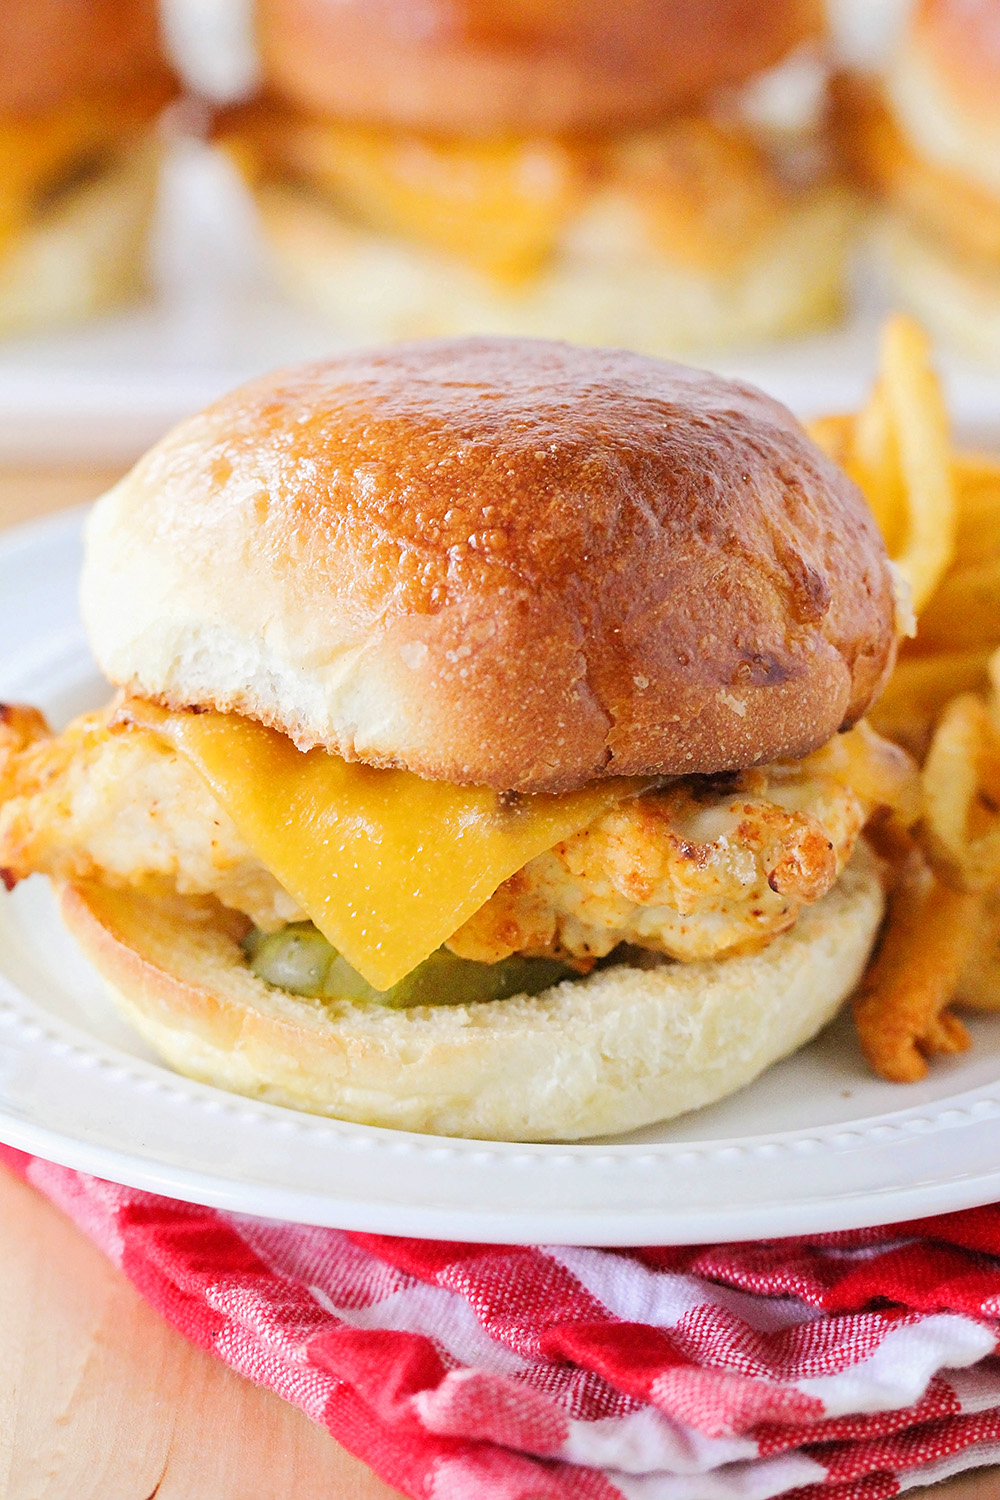 These homemade Chick Fil A sandwiches are so savory and delicious! They're baked, not fried, but just as tasty as the original!